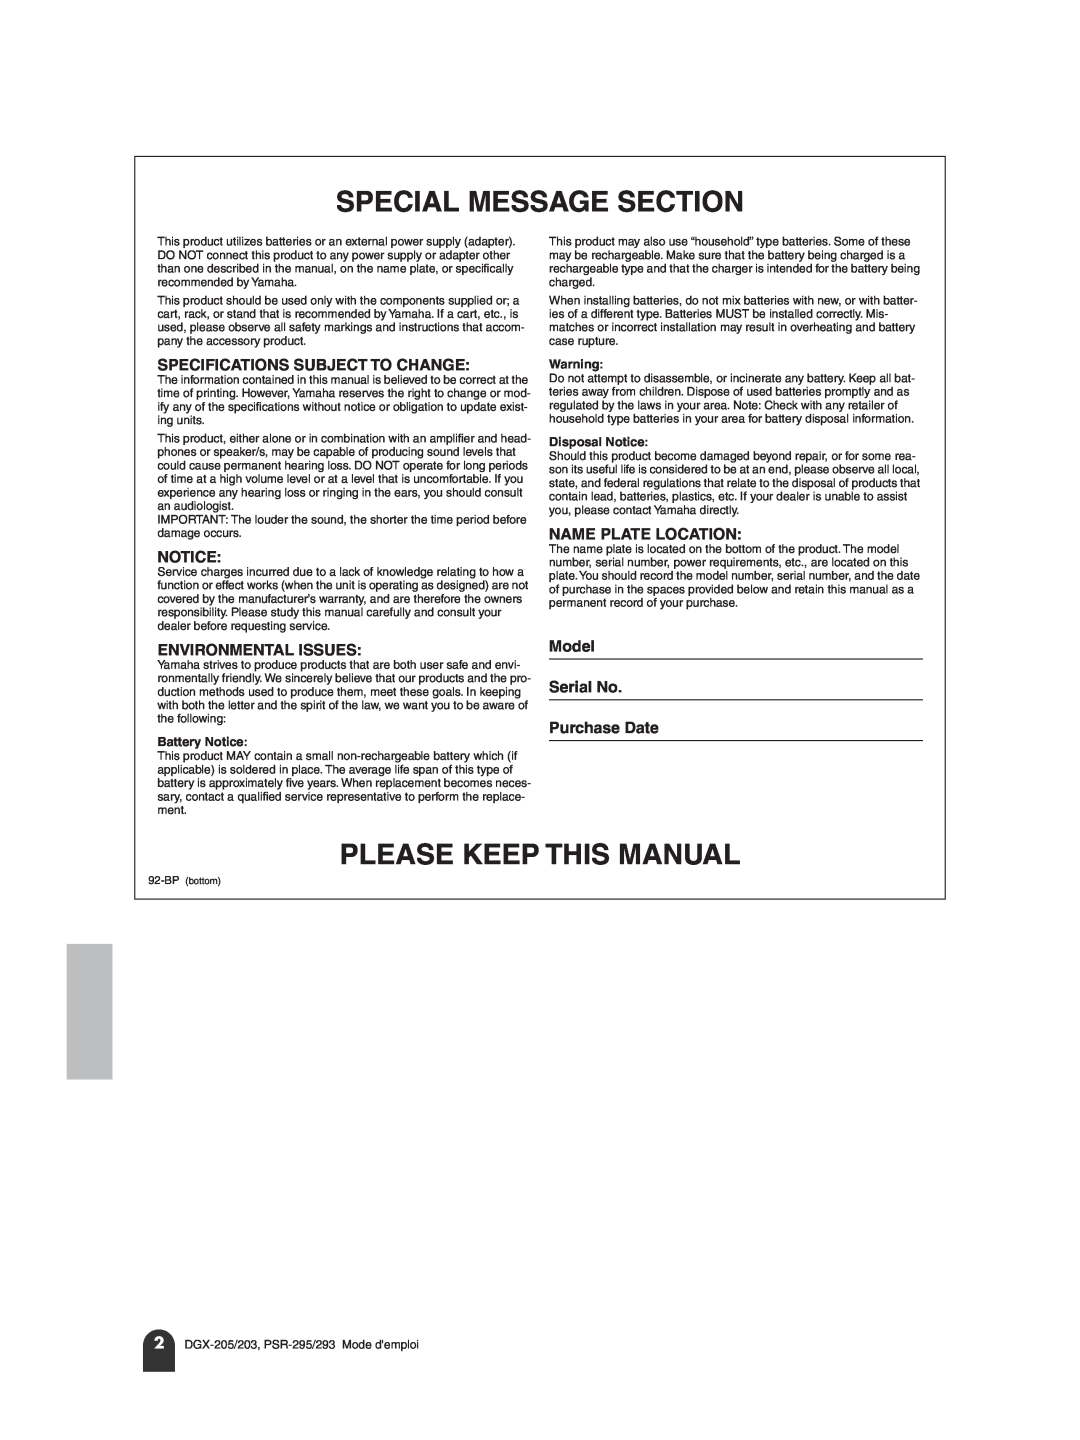 Yamaha PortableGrand DGX-205 Special Message Section, Please Keep This Manual, Specifications Subject To Change 